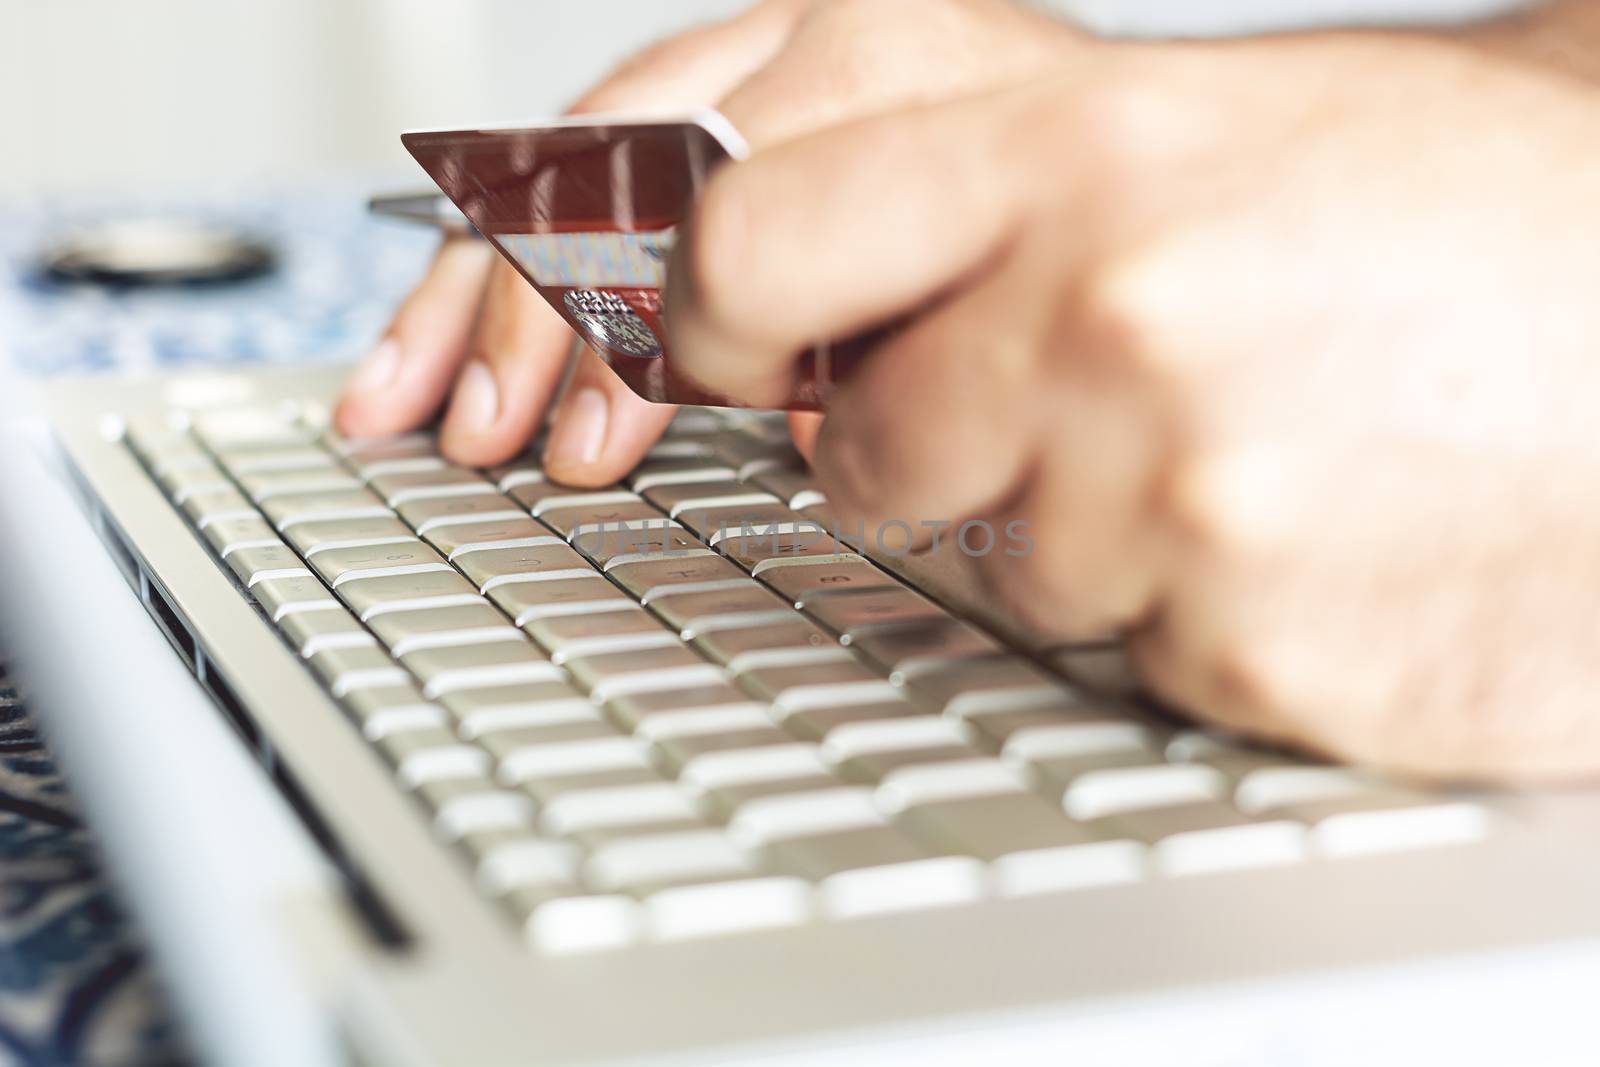 male person using a credit card for internet financial transactions. E-commerce and online shopping.